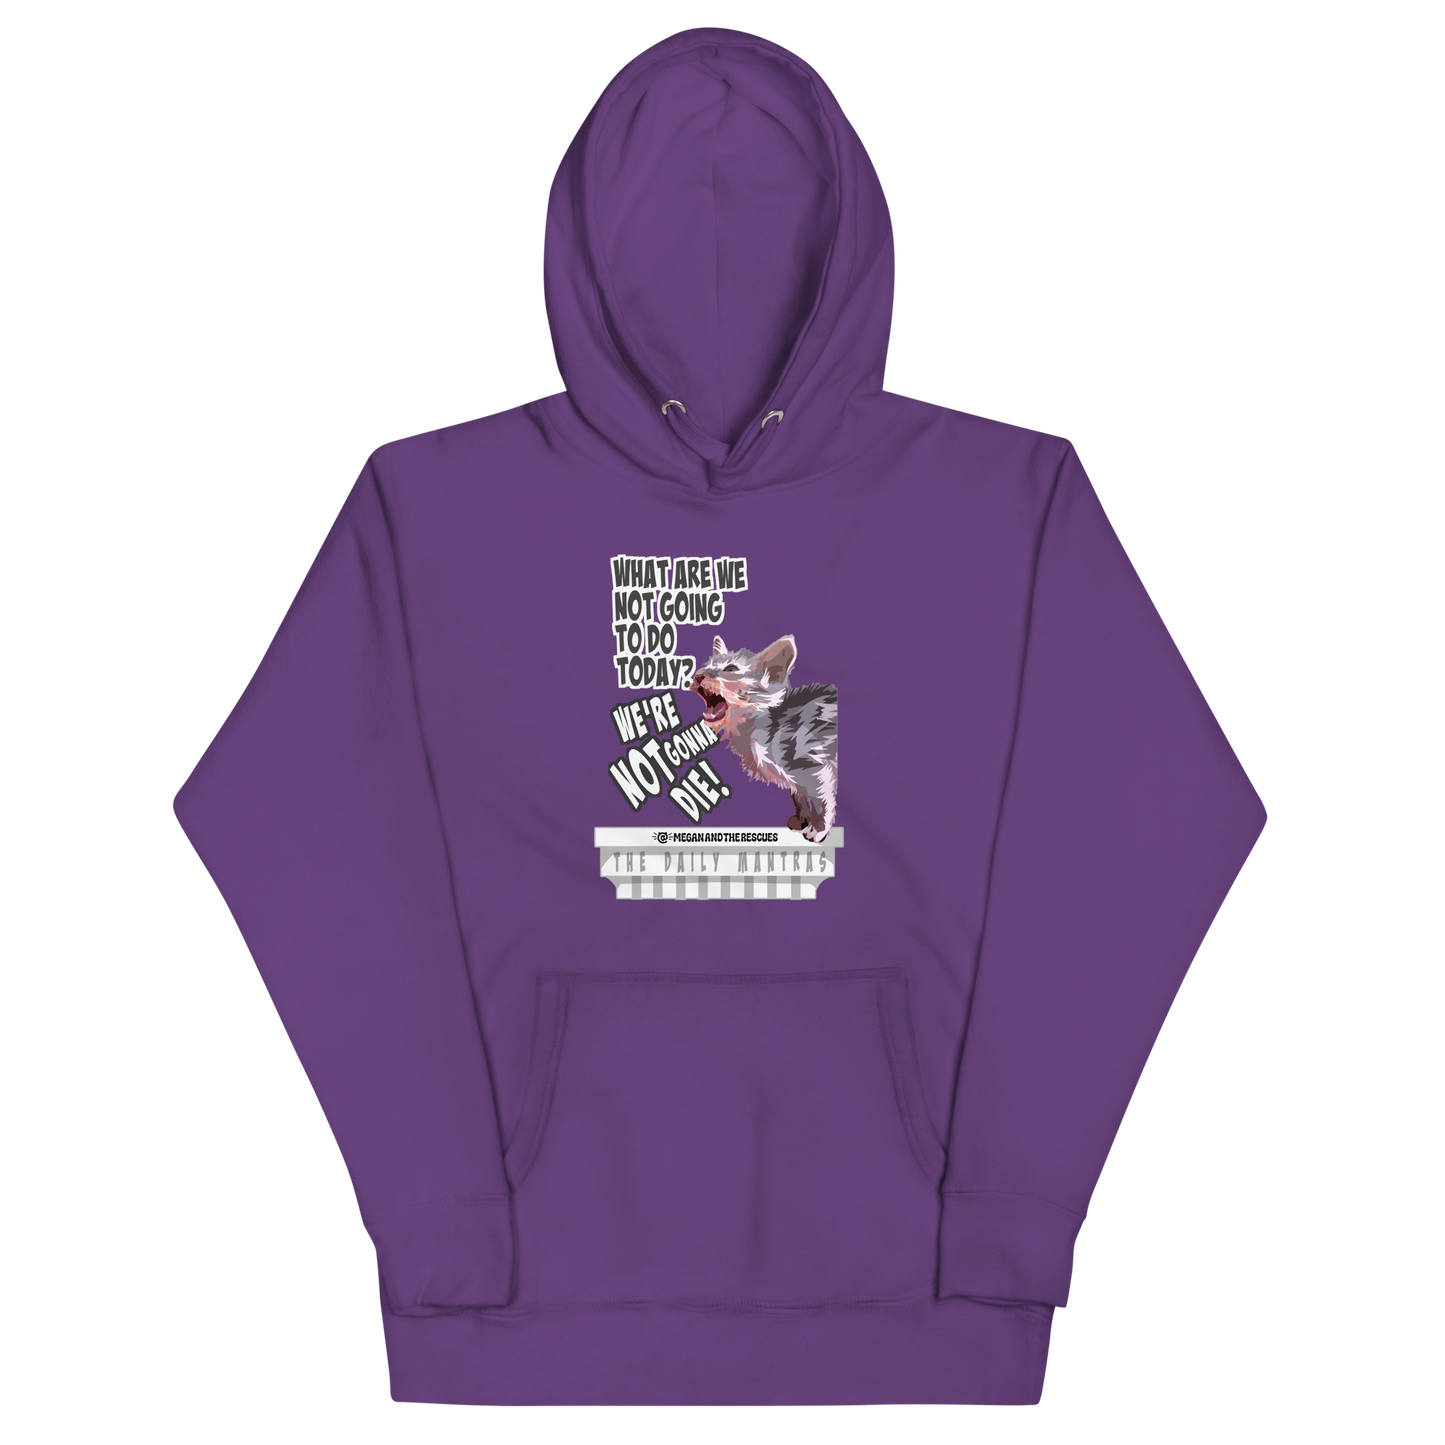 The Daily Mantras (Version 2) - Unisex Hoodie